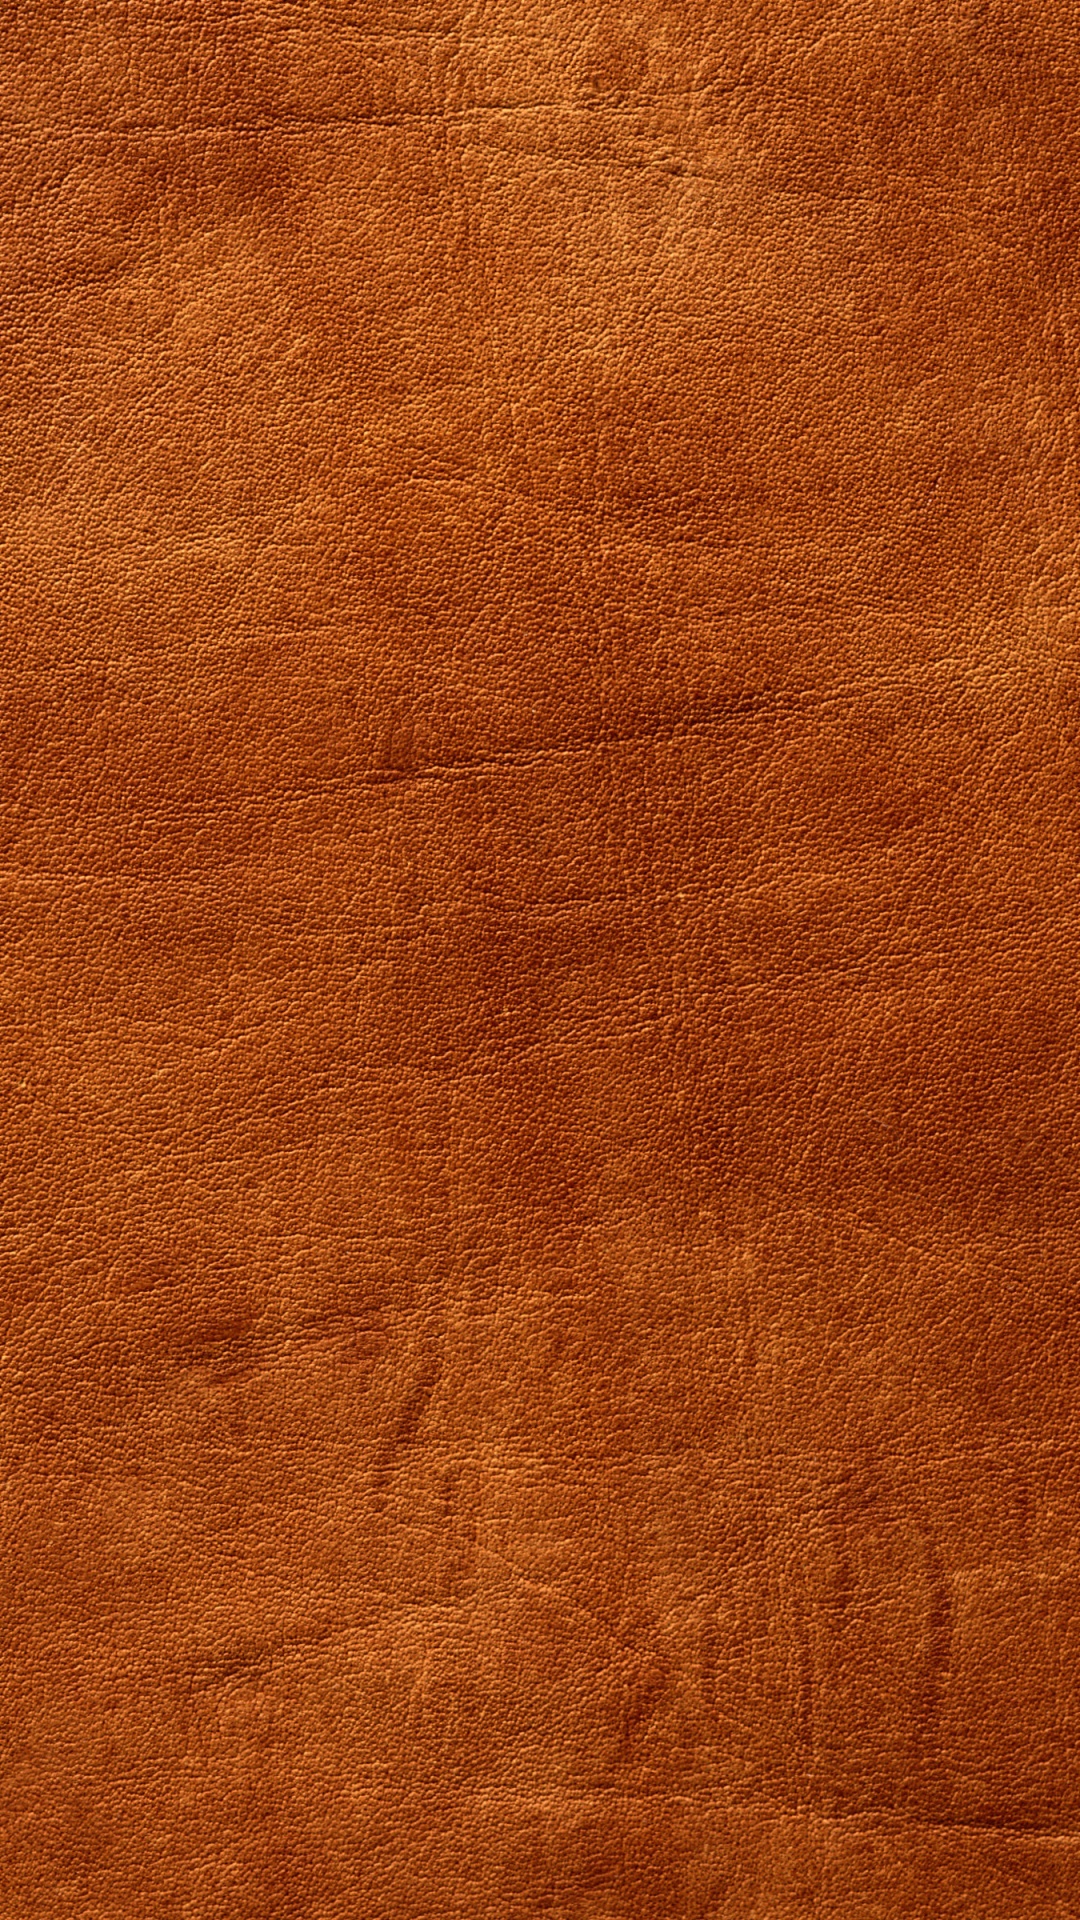 Brown Textile on Brown Wooden Table. Wallpaper in 1080x1920 Resolution